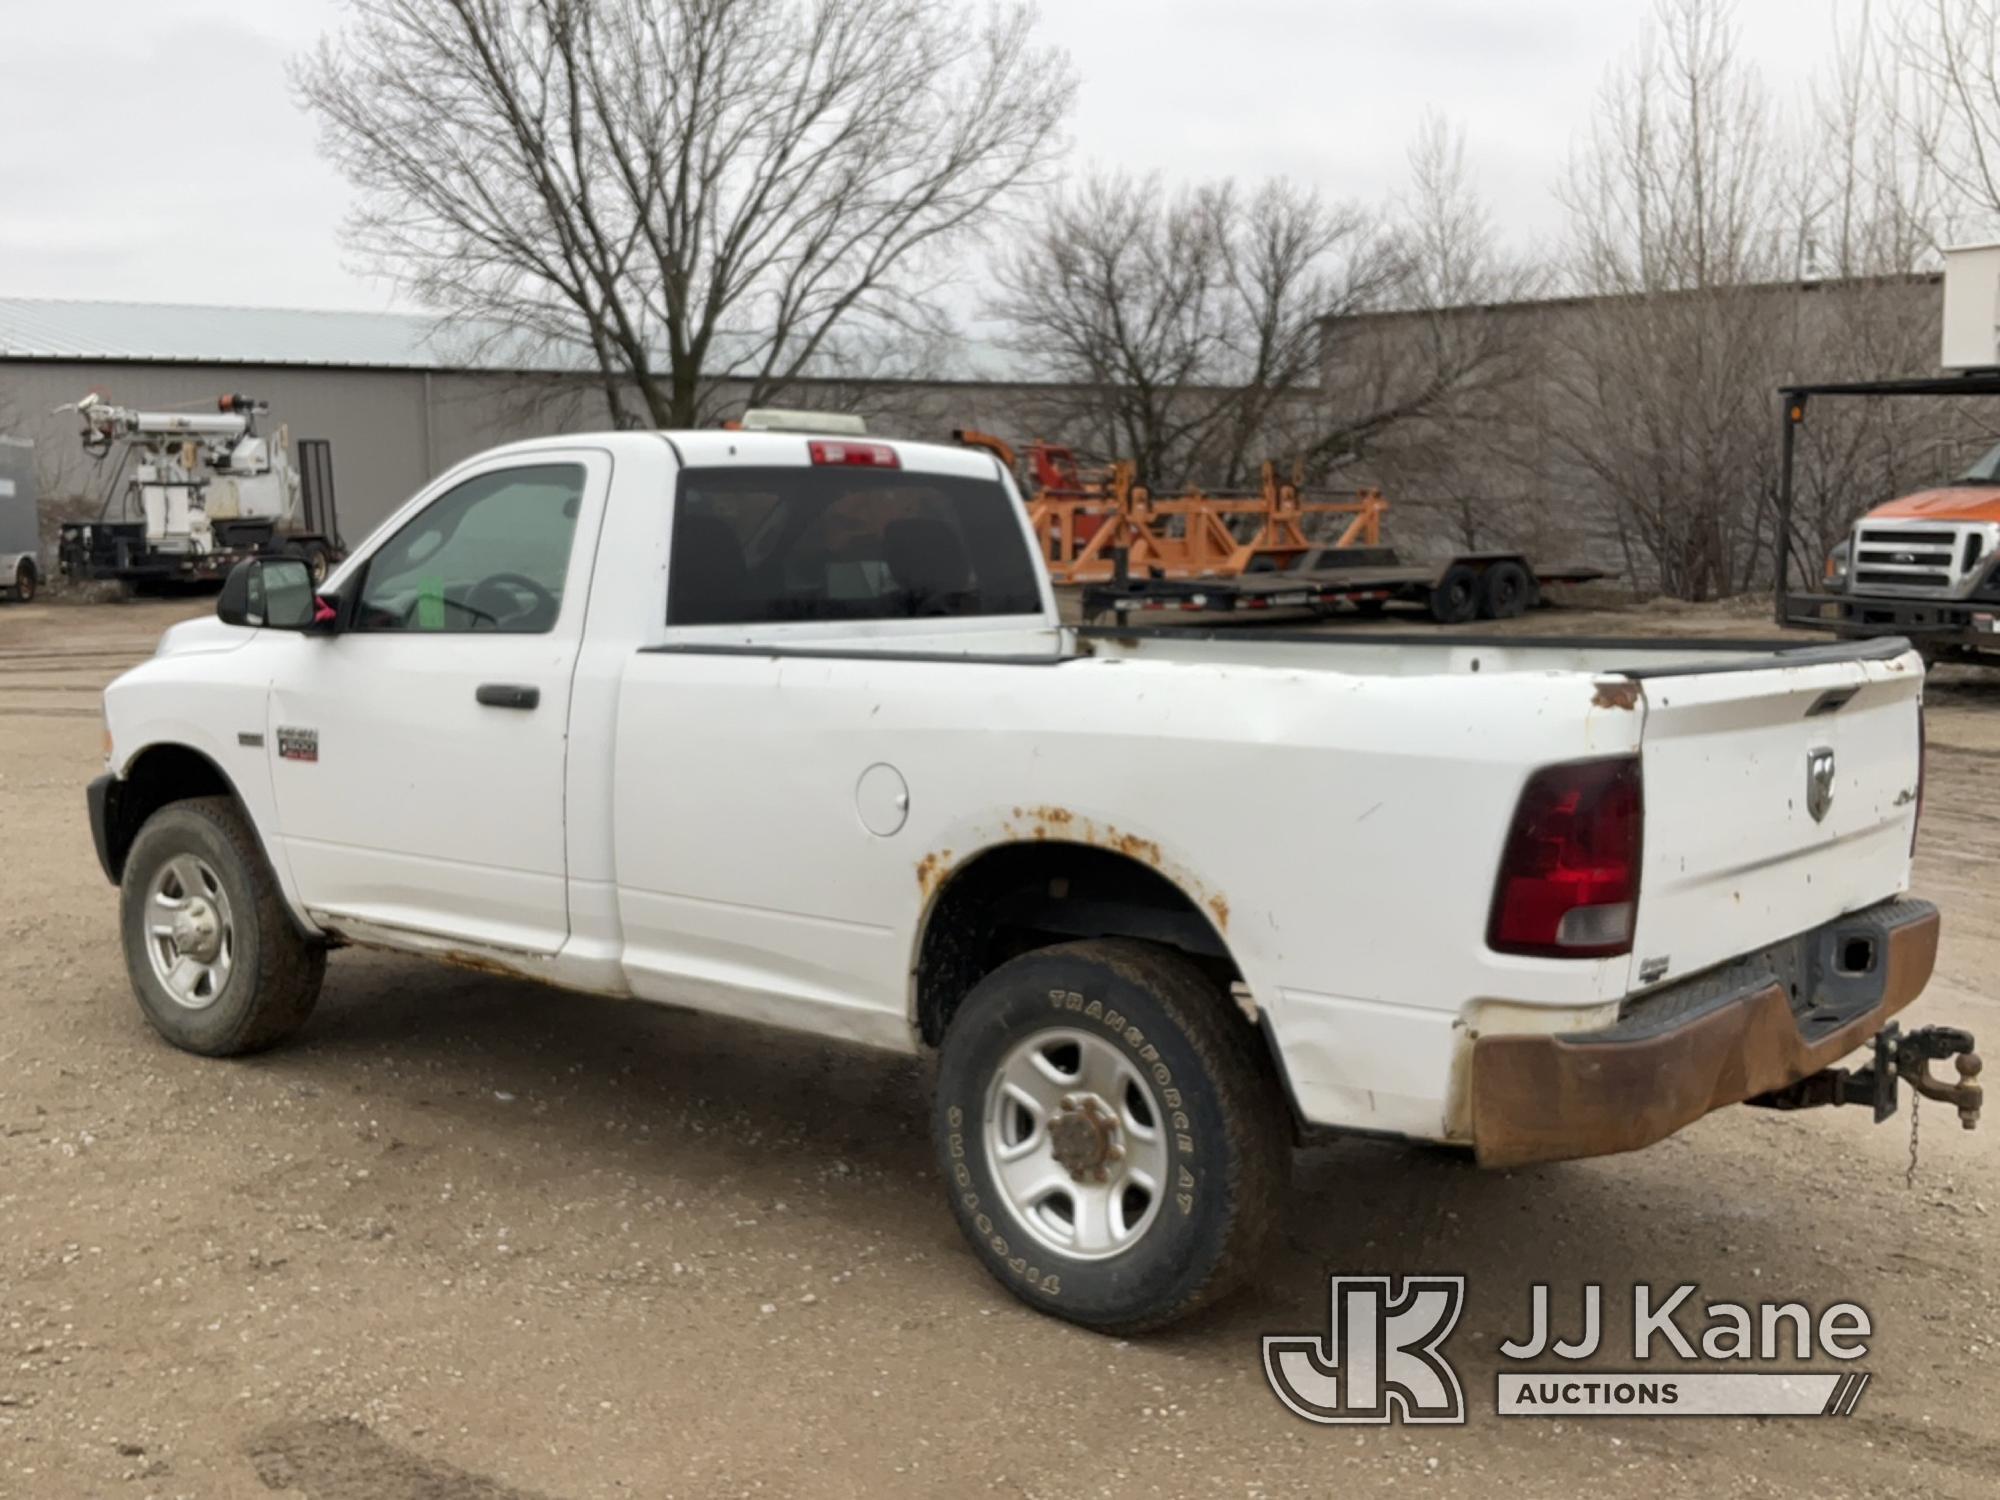 (Des Moines, IA) 2012 RAM 2500 4x4 Run & Moves) (engine knock, rough idle, check engine light